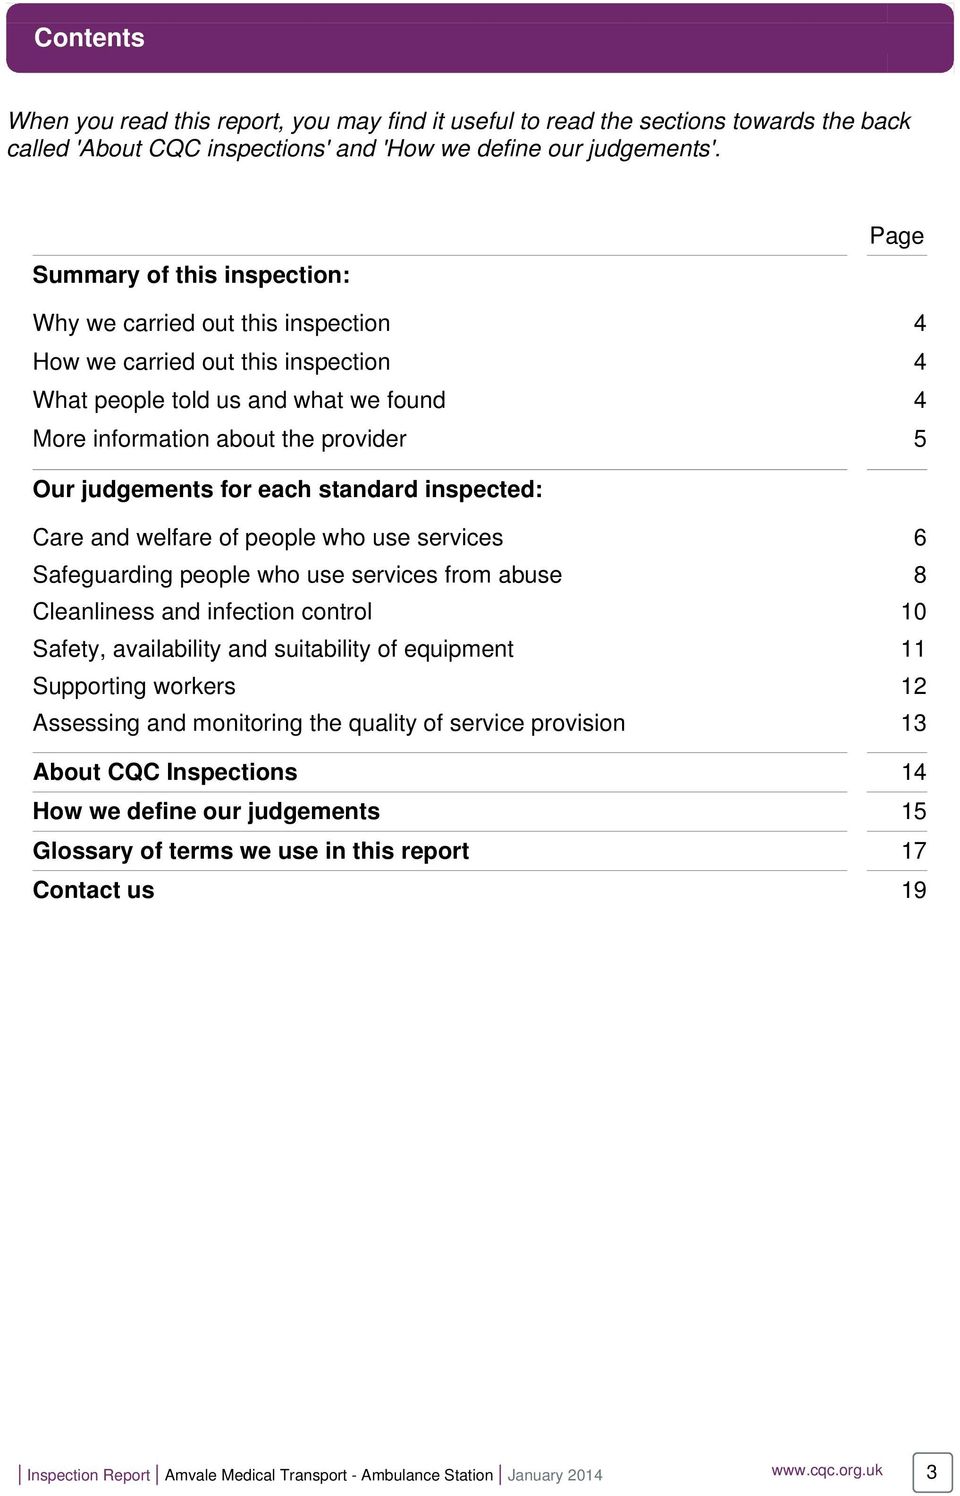 for each standard inspected: Care and welfare of people who use services 6 Safeguarding people who use services from abuse 8 Cleanliness and infection control 10 Safety, availability and suitability